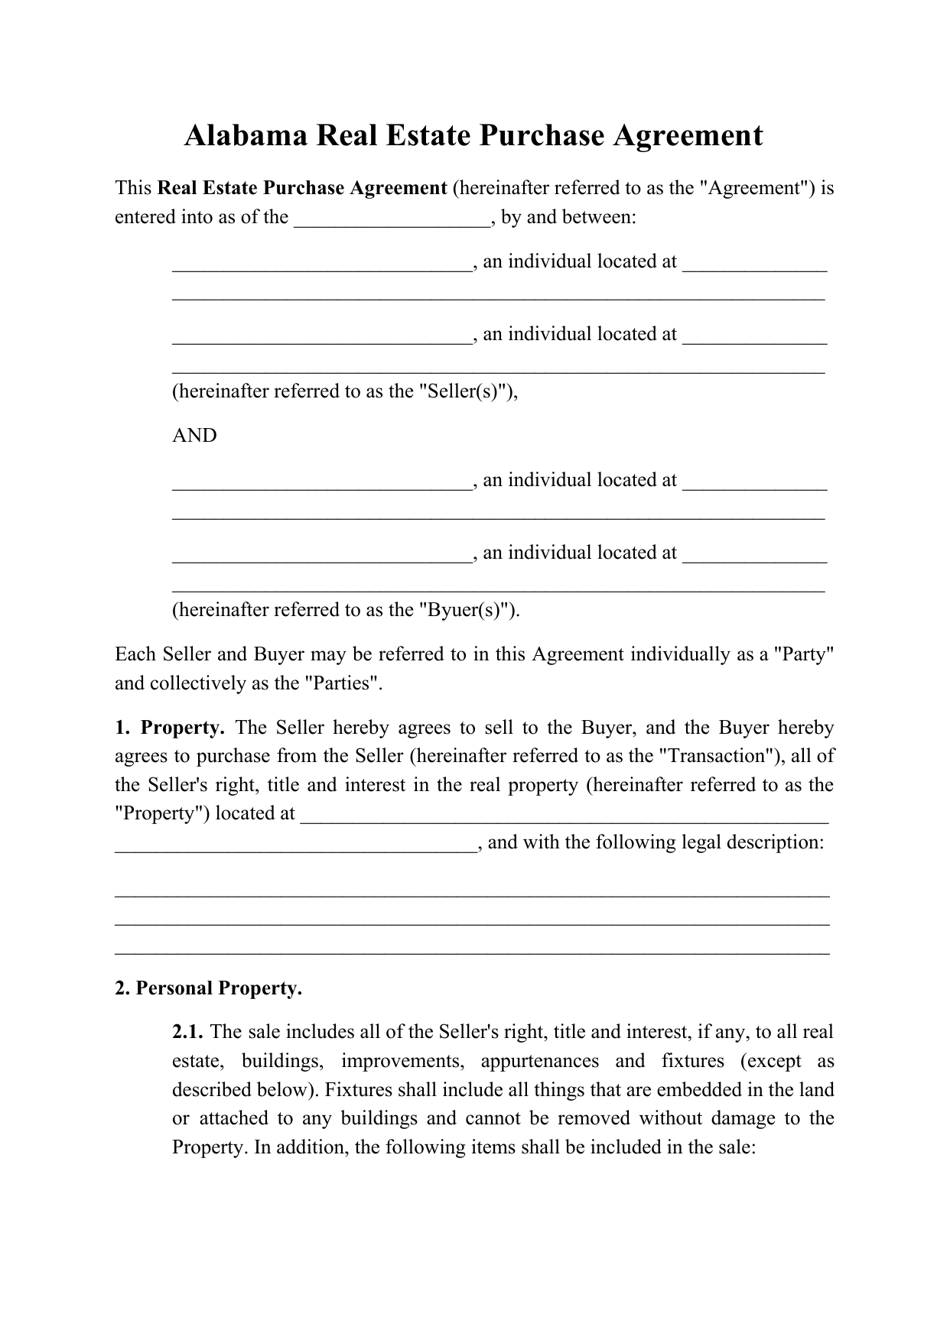 alabama-real-estate-purchase-agreement-template-fill-out-sign-online